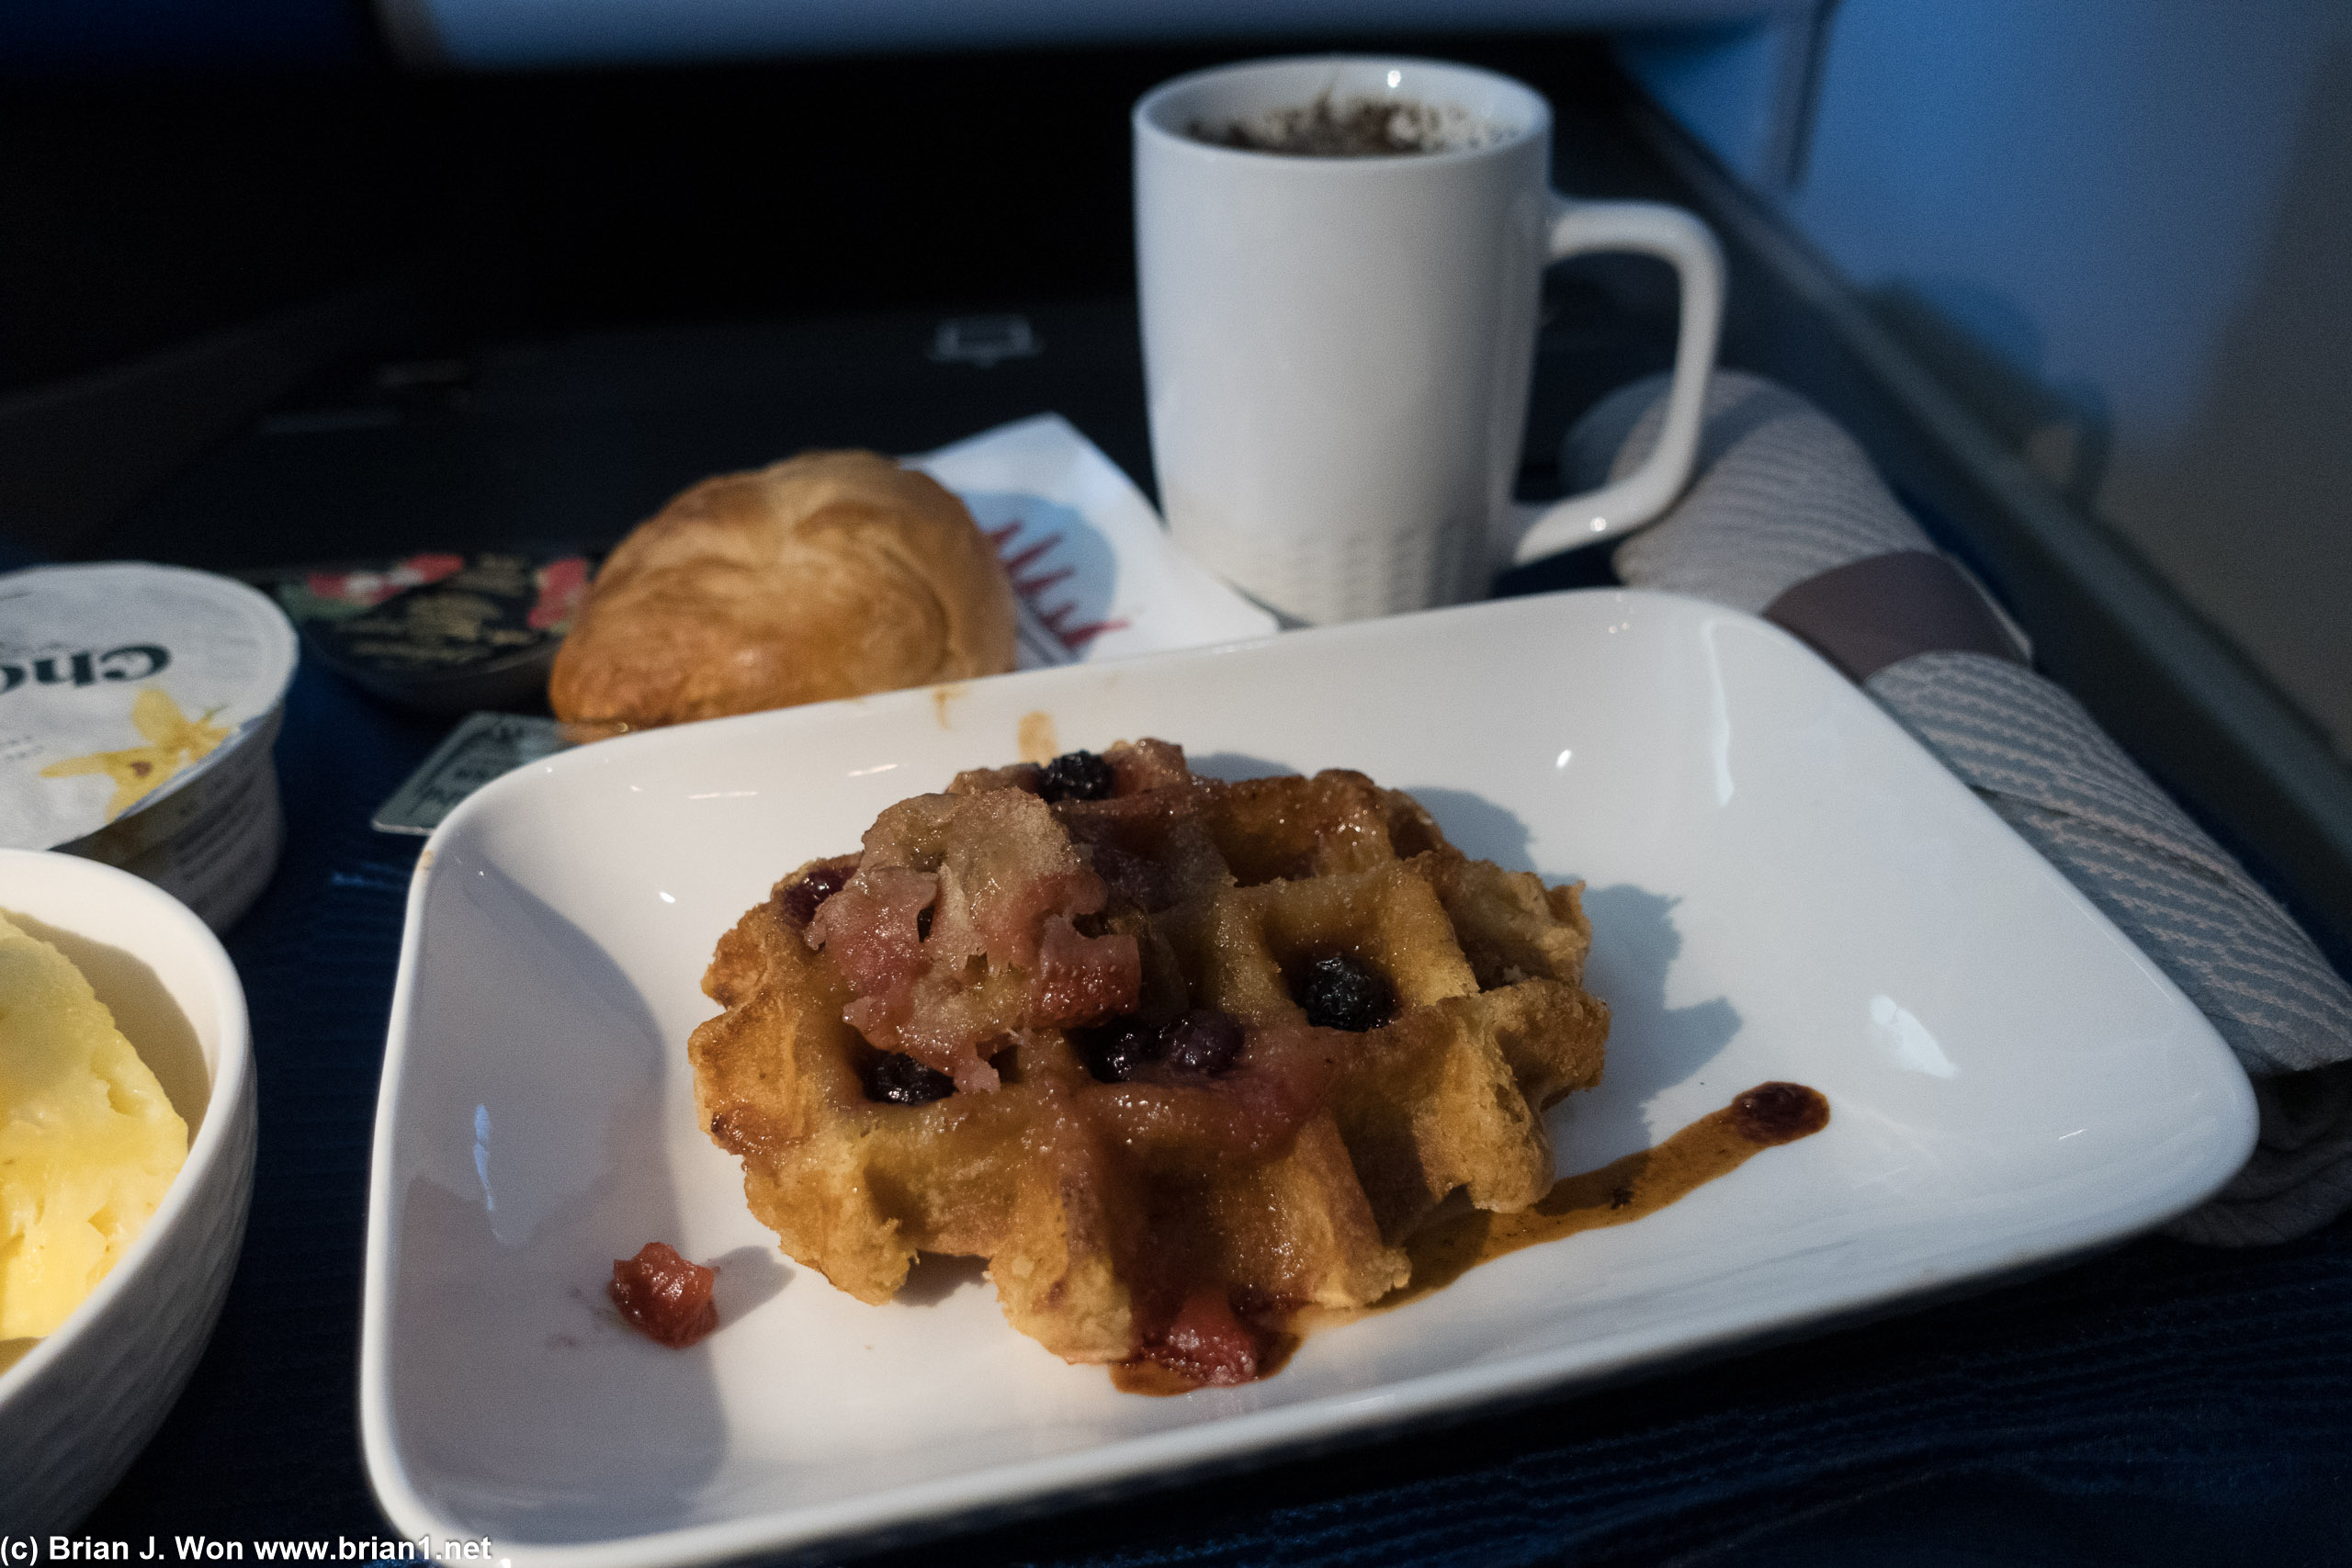 The waffle in domestic first class is an okay portion size but way too sweet.